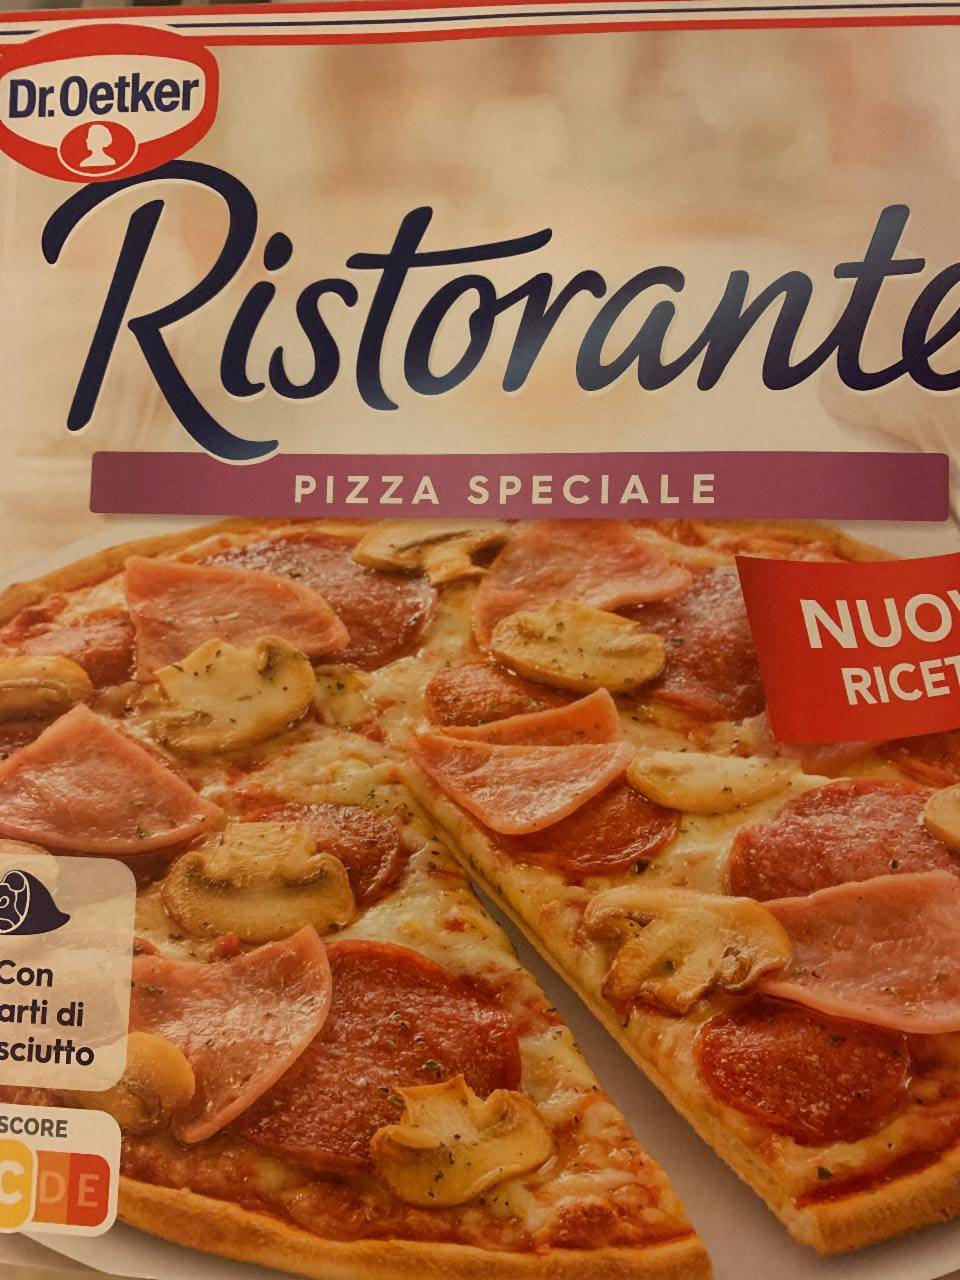 Фото - Pizza Specials Dr. Oetker